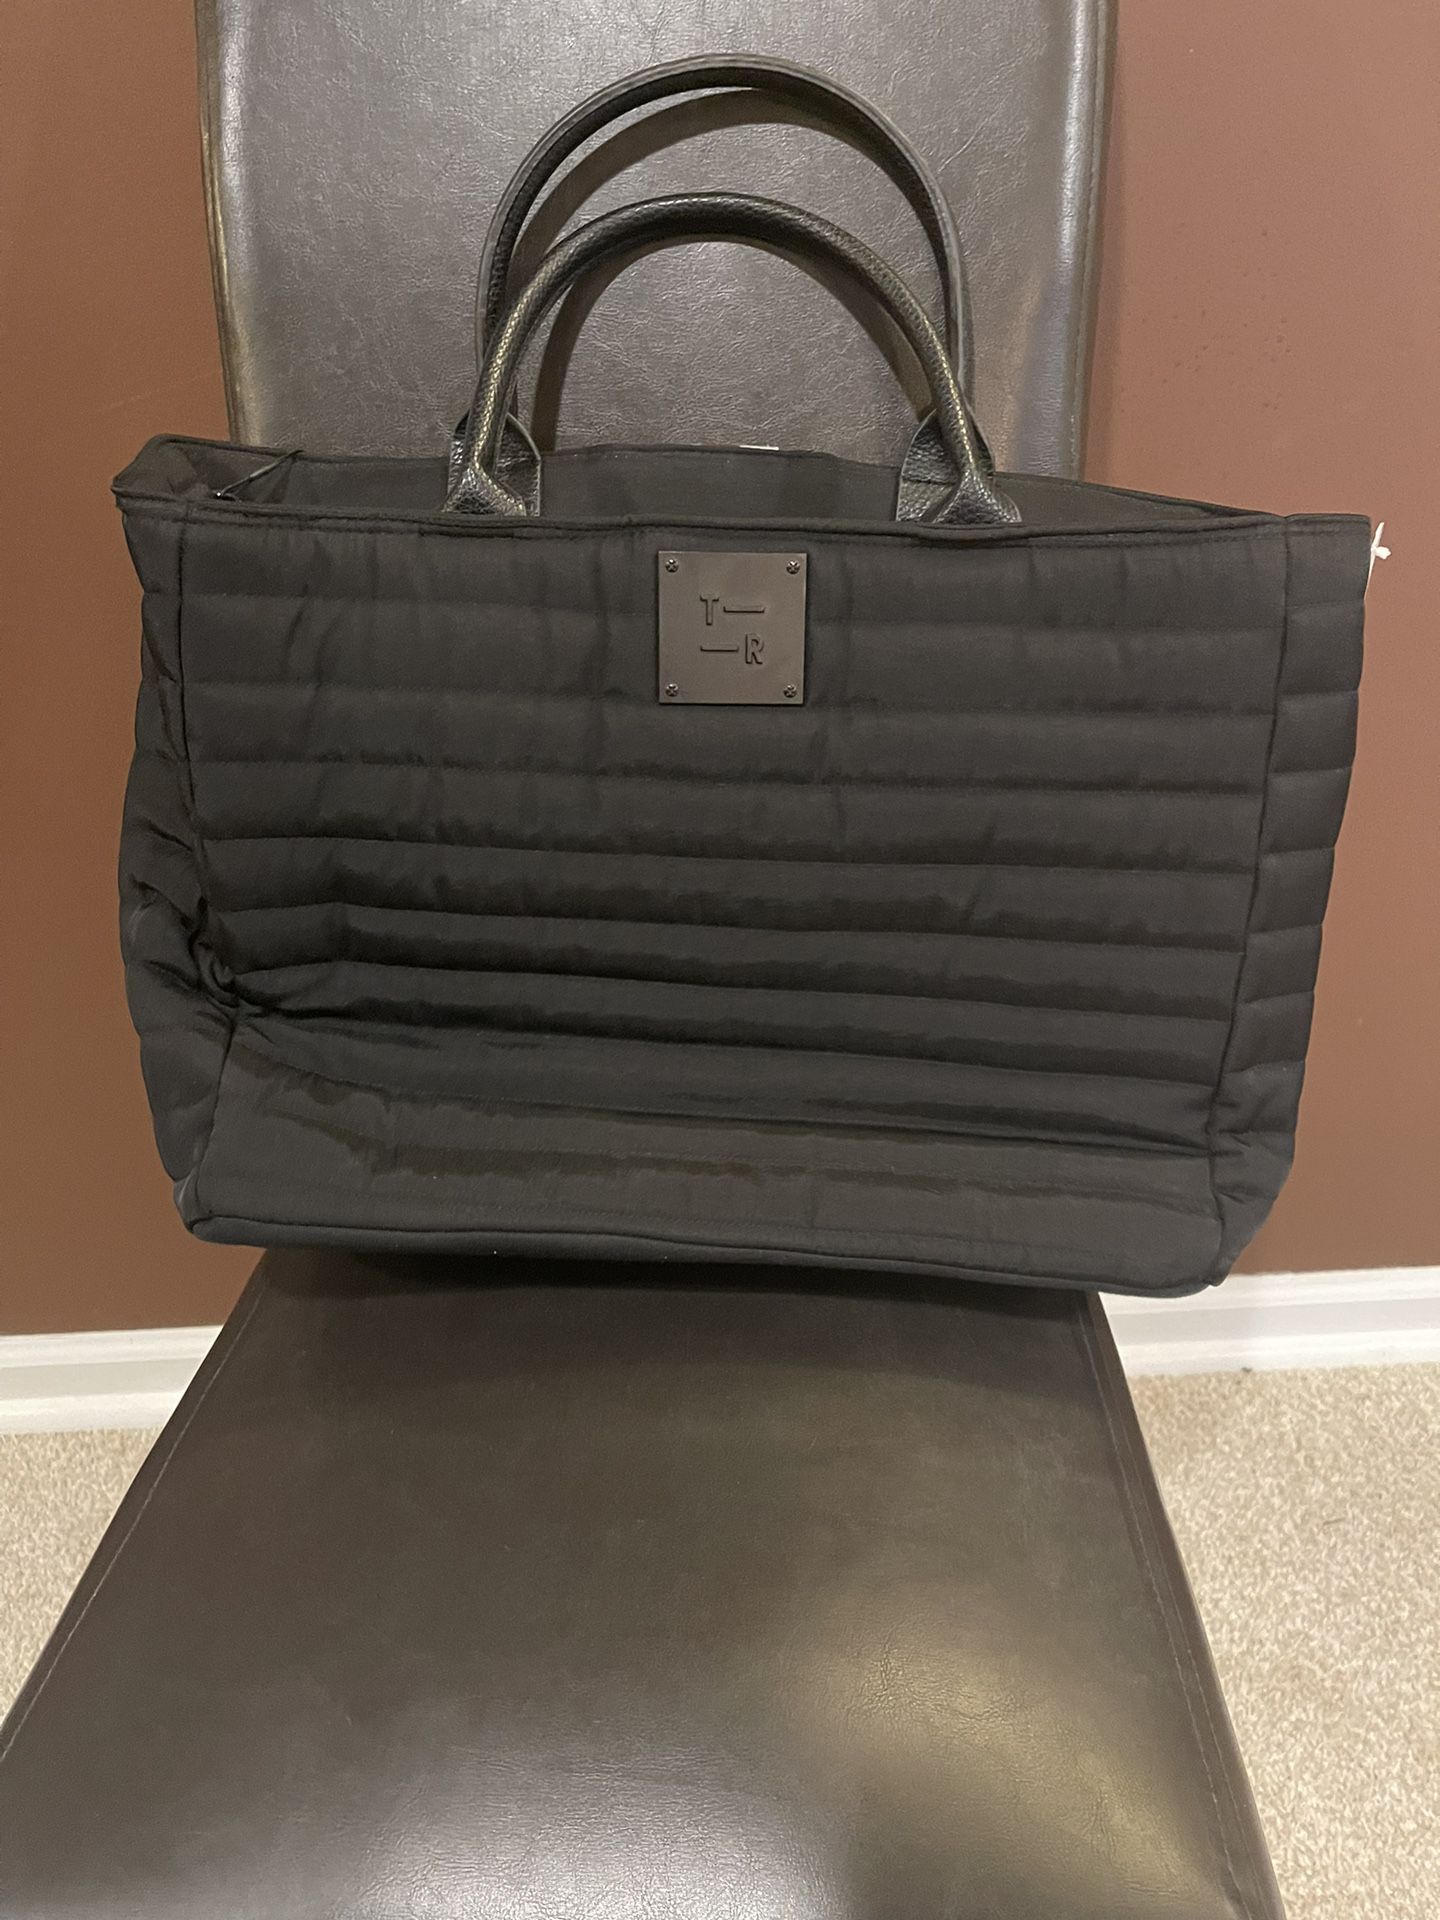 Think Royln The Parisian Tote Quilted Bag $268